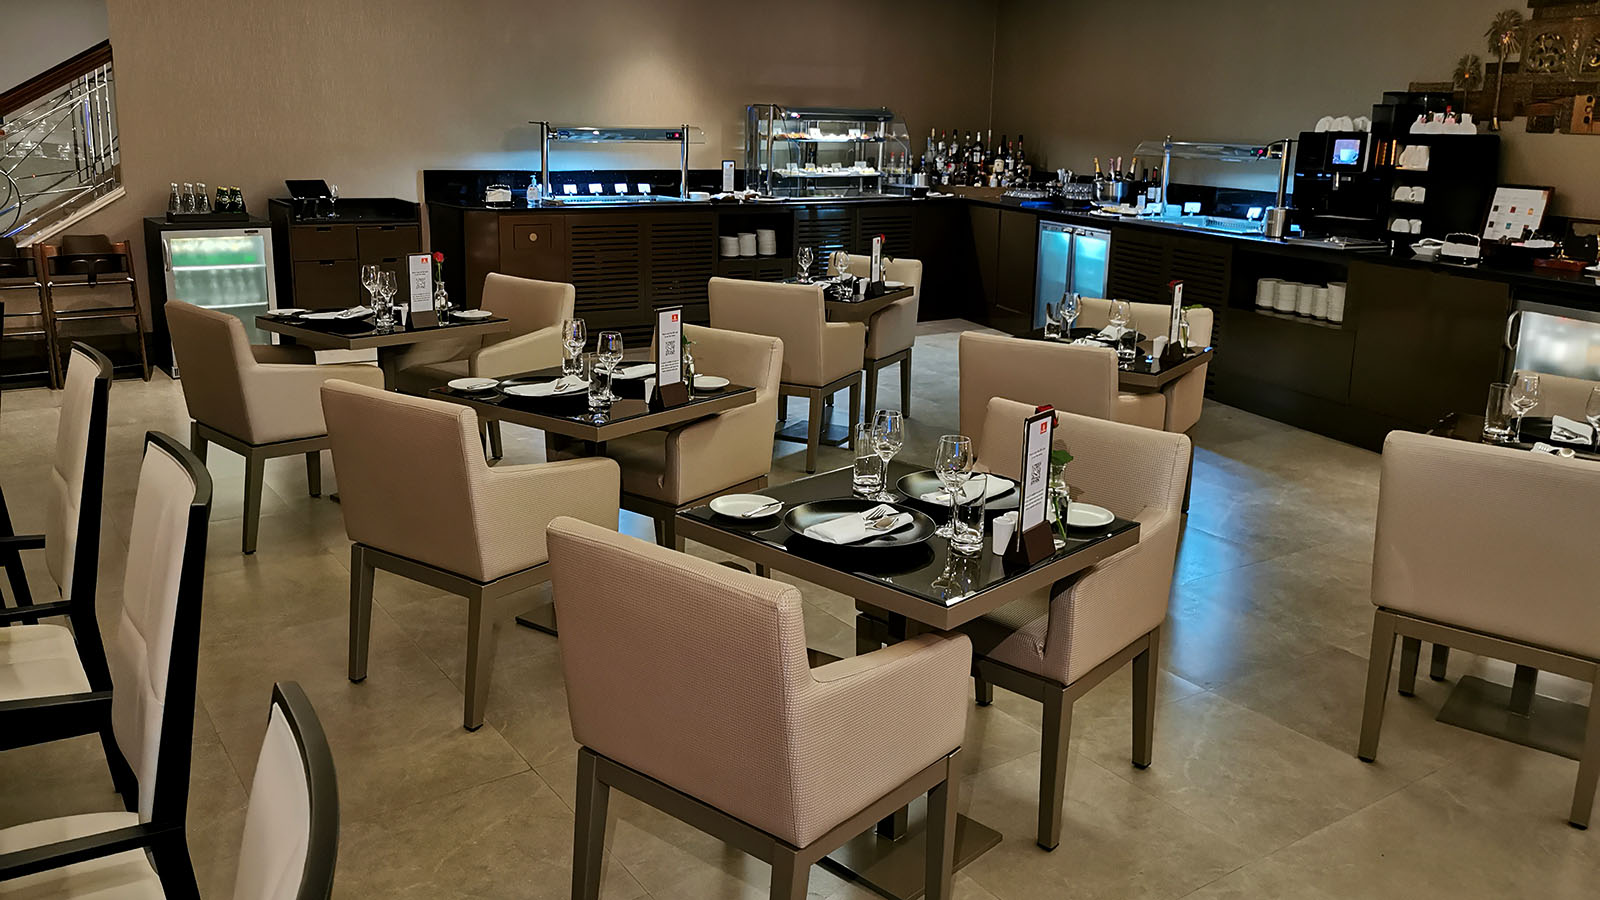 Tables and chairs in the Emirates First Class Lounge, Dubai Concourse C